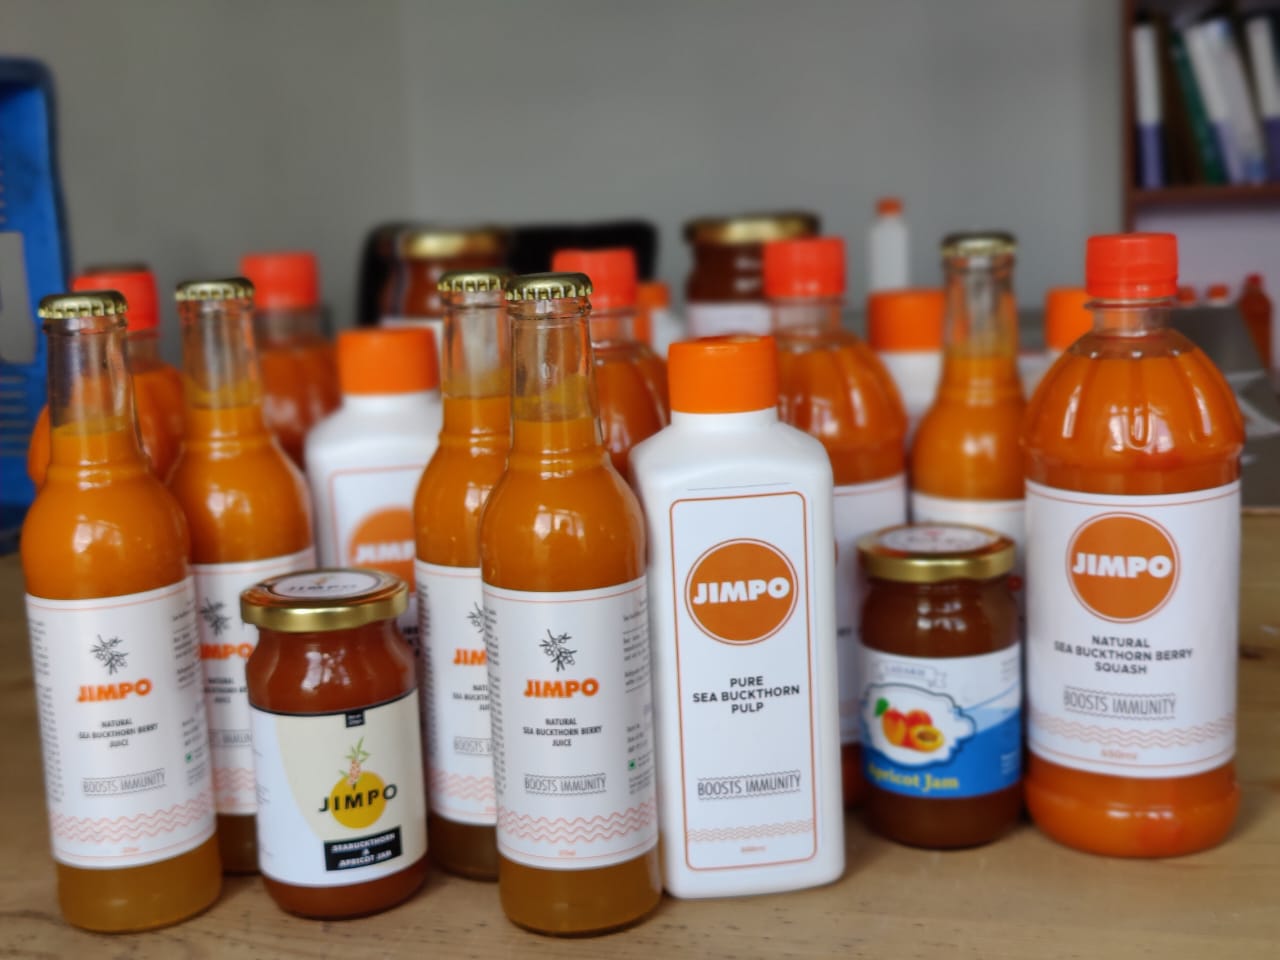 Among Jimpo's range of products are jams, juices and pulps that all have sea buckthorn as the hero ingredient